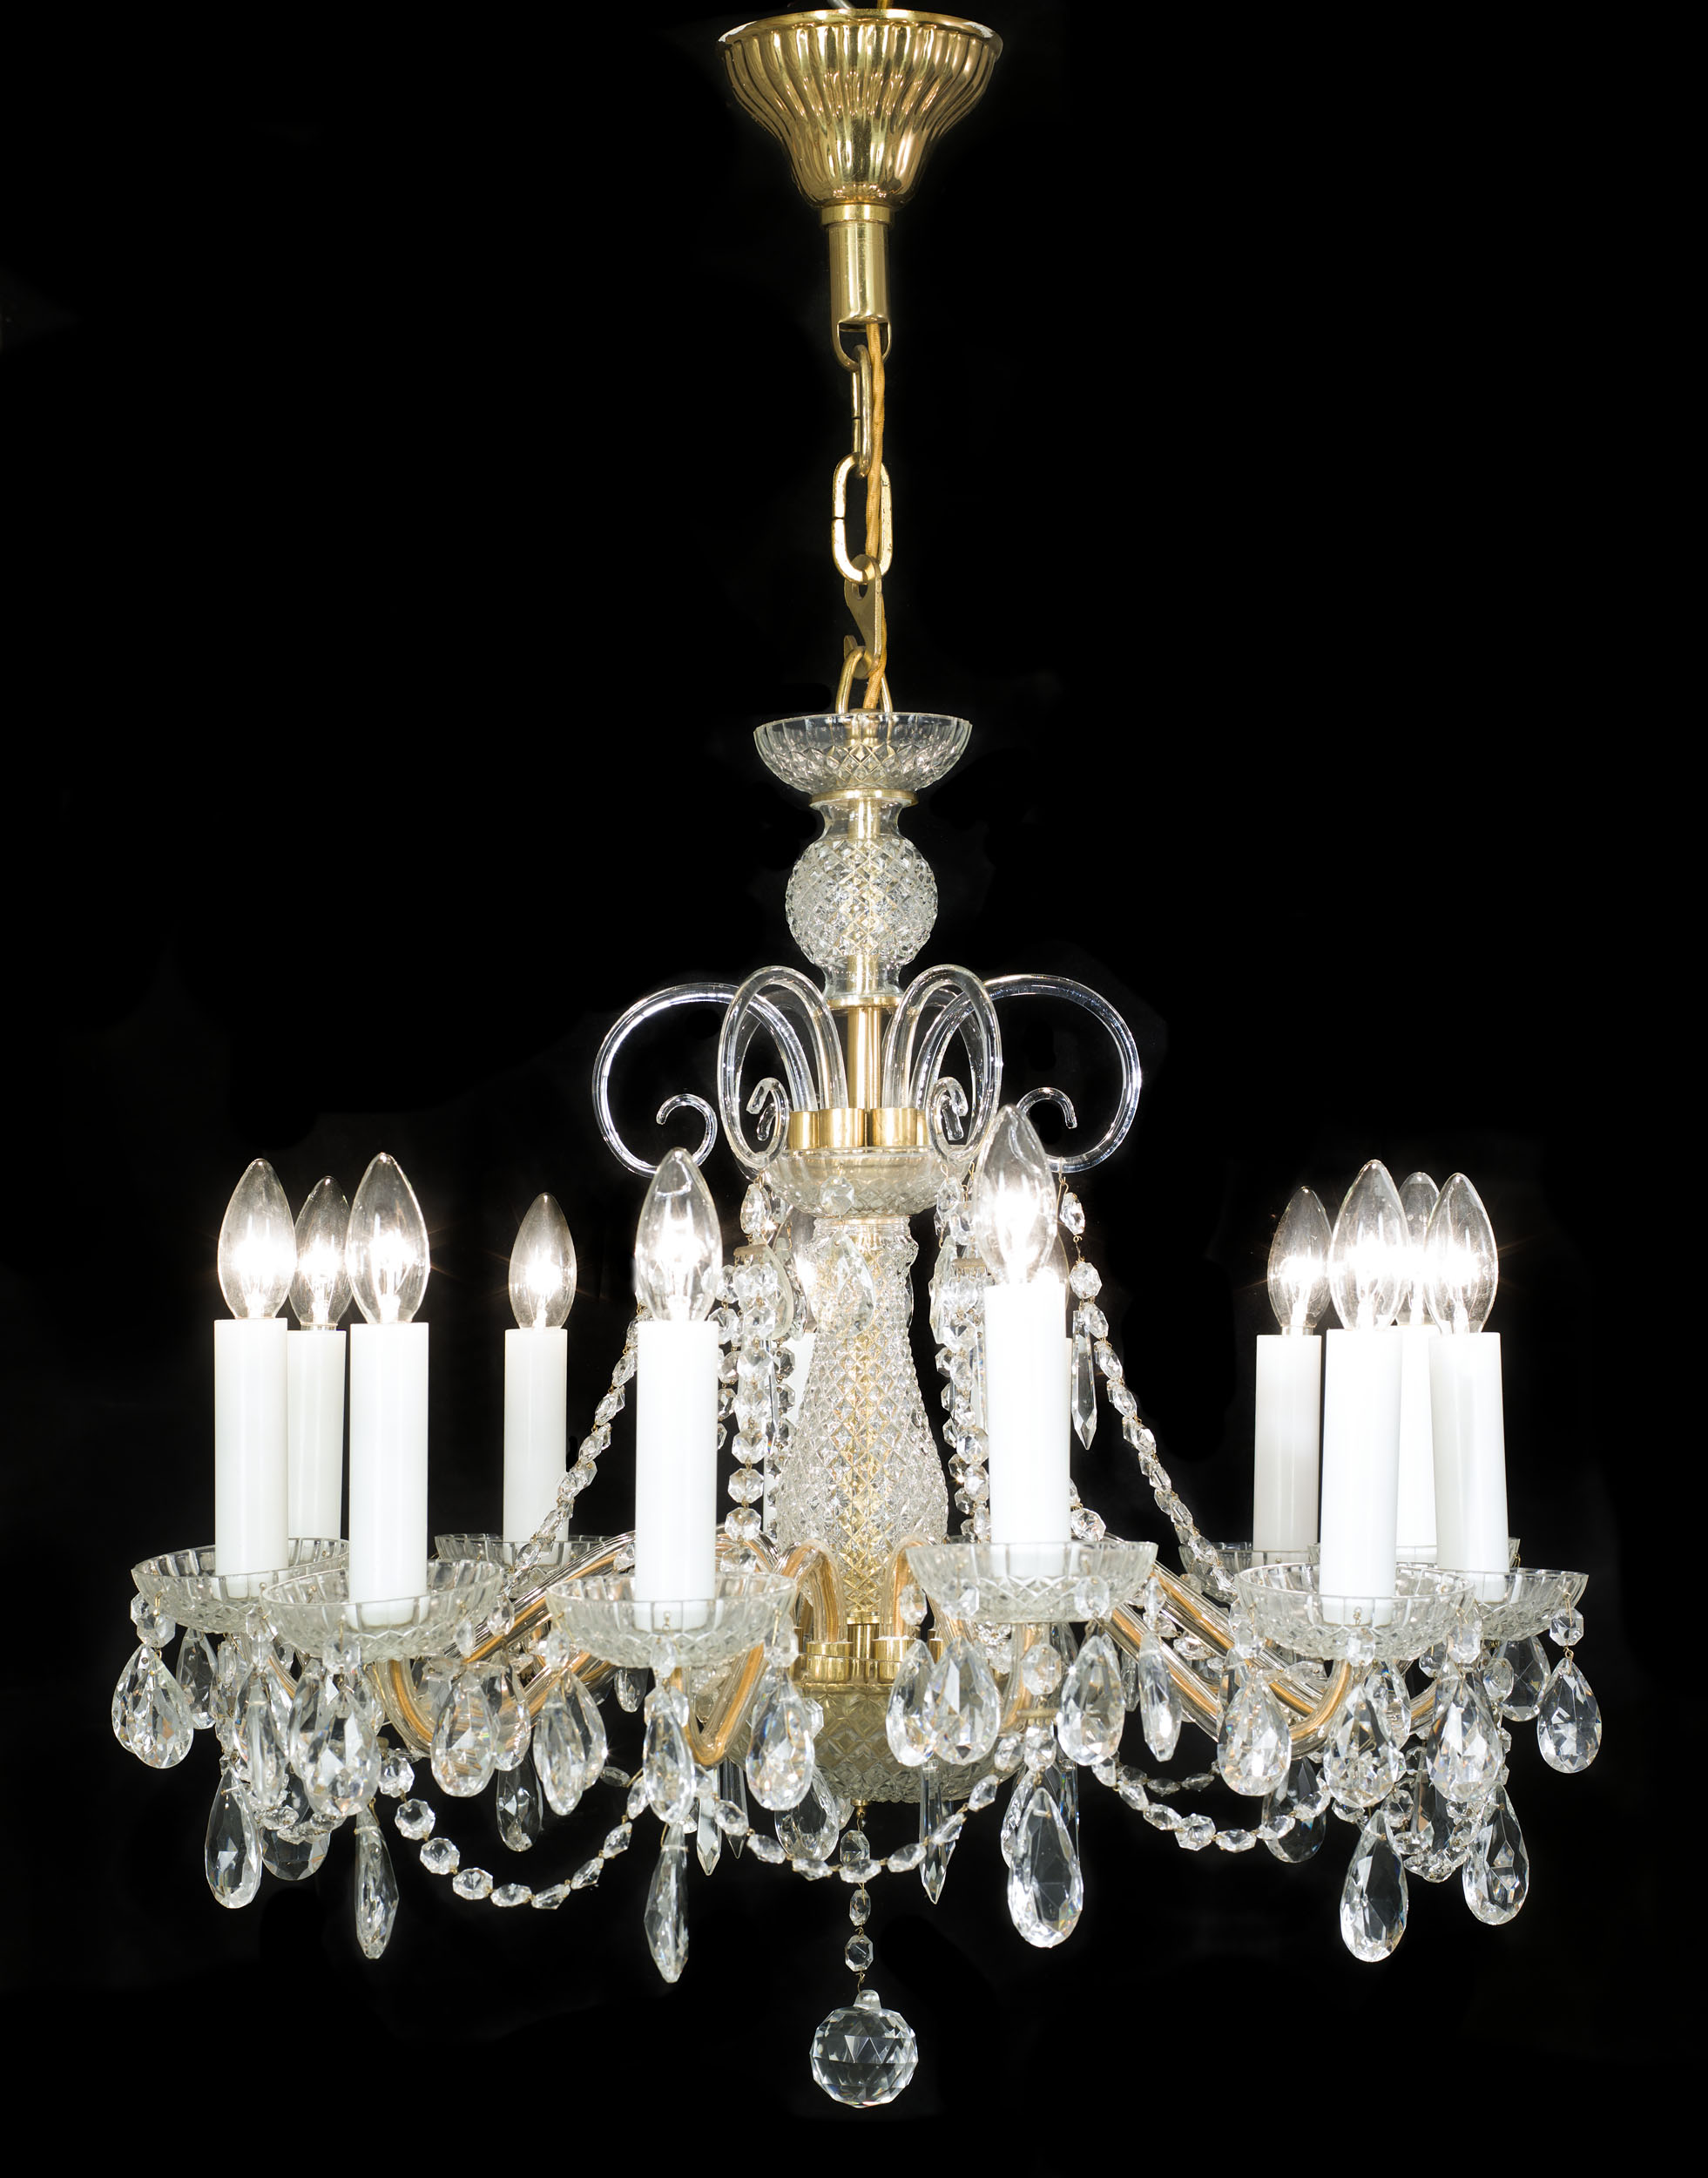 One of Four Identical Cut Glass Chandeliers